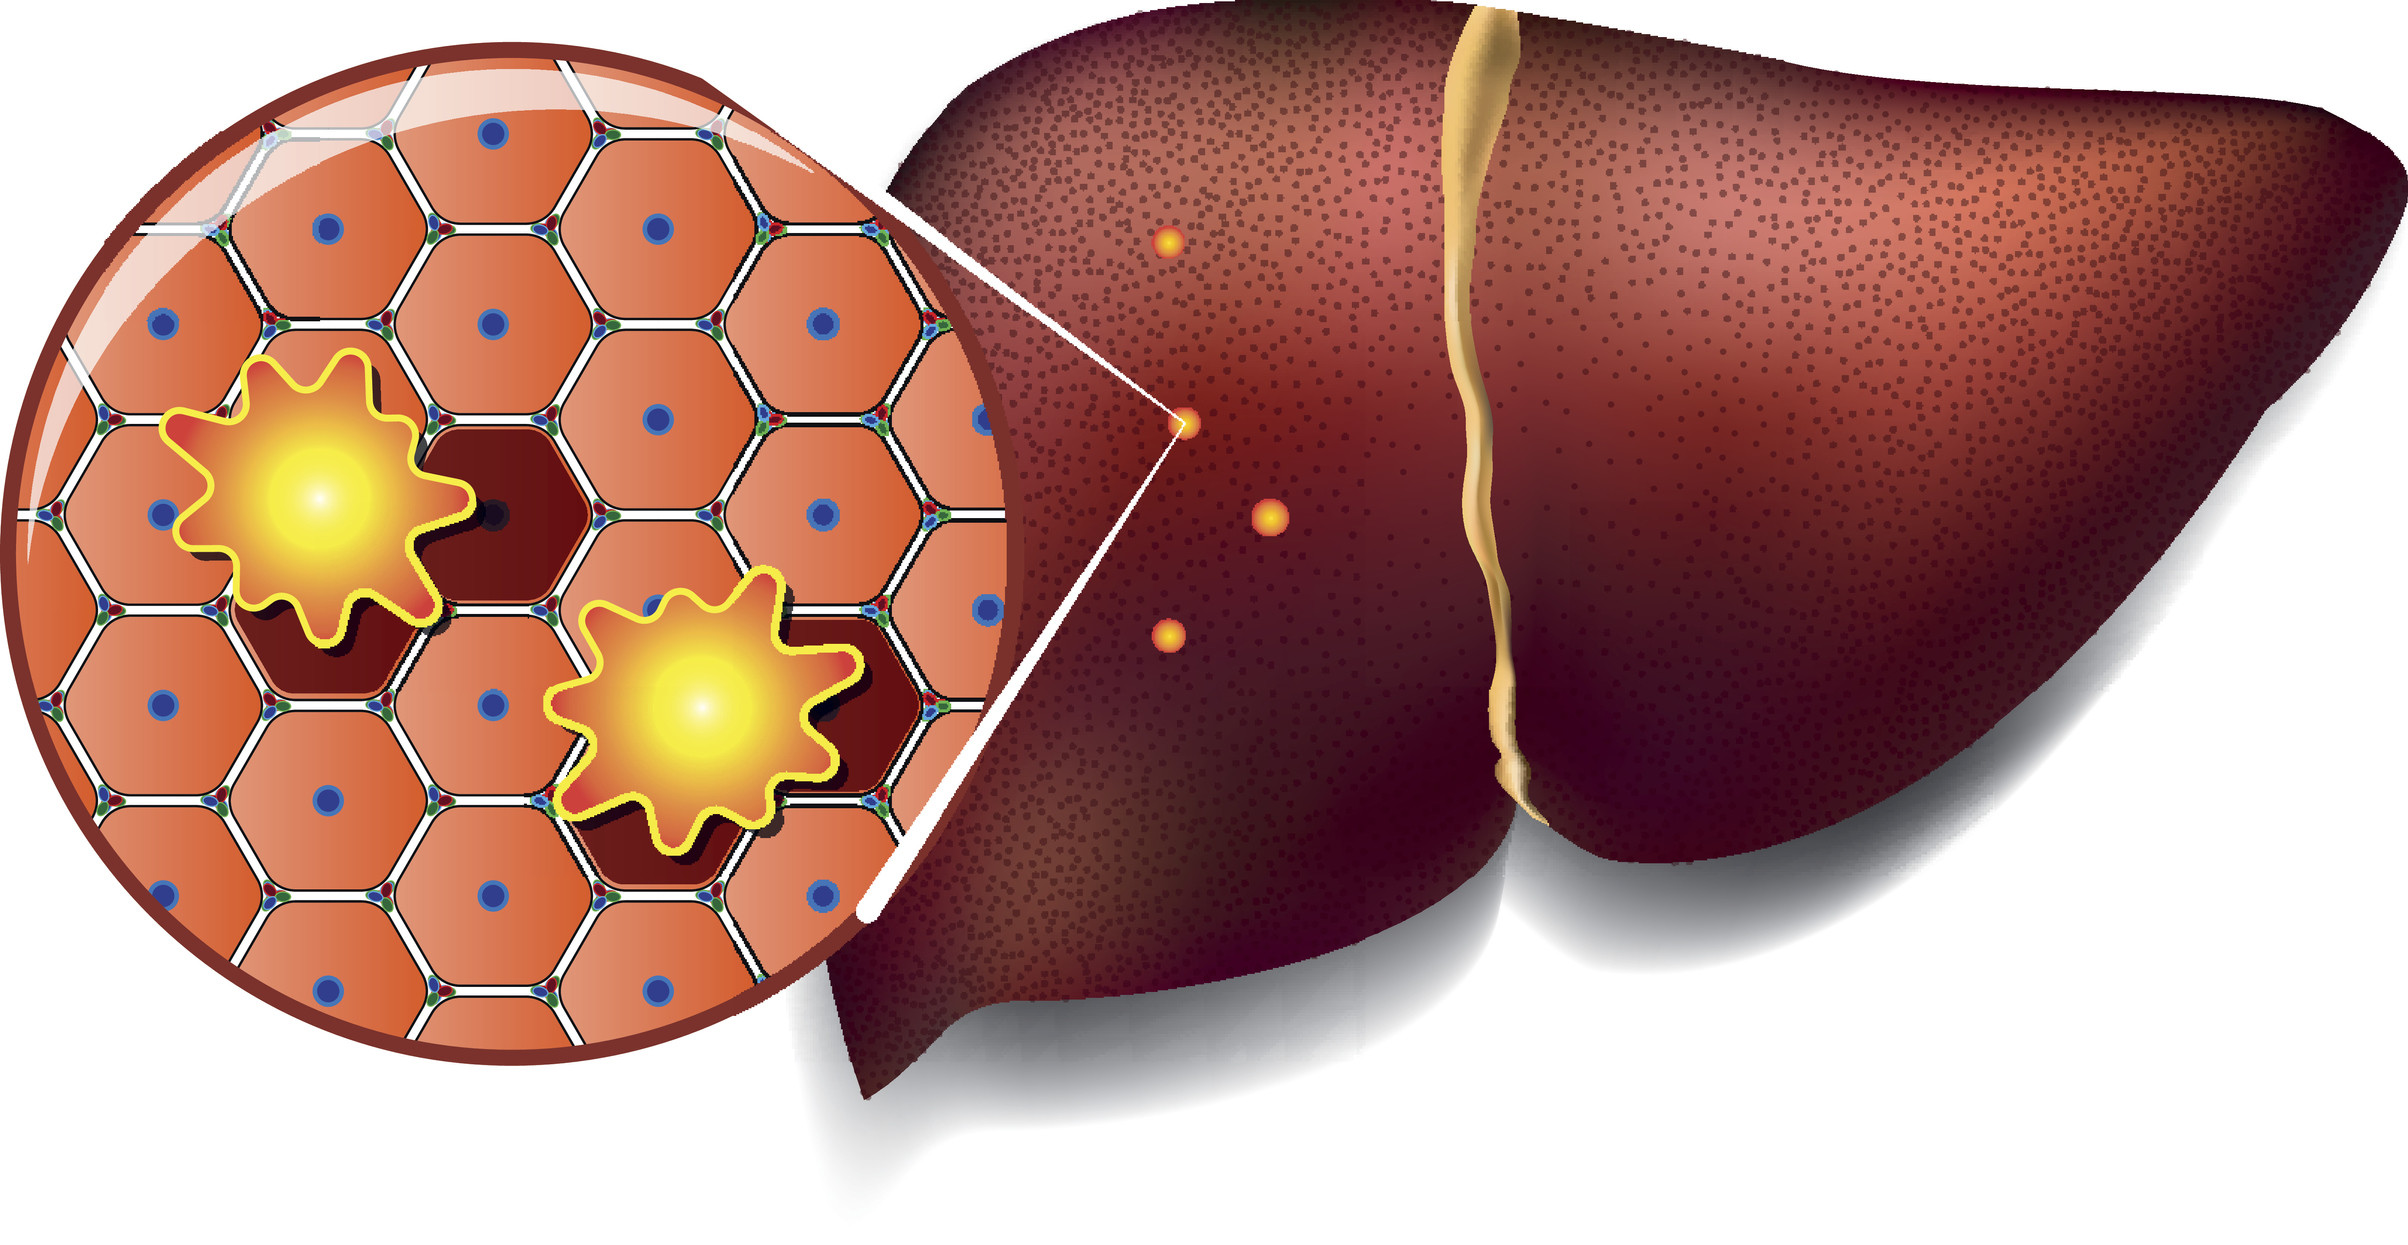 Liver Cells Attacked by Toxins